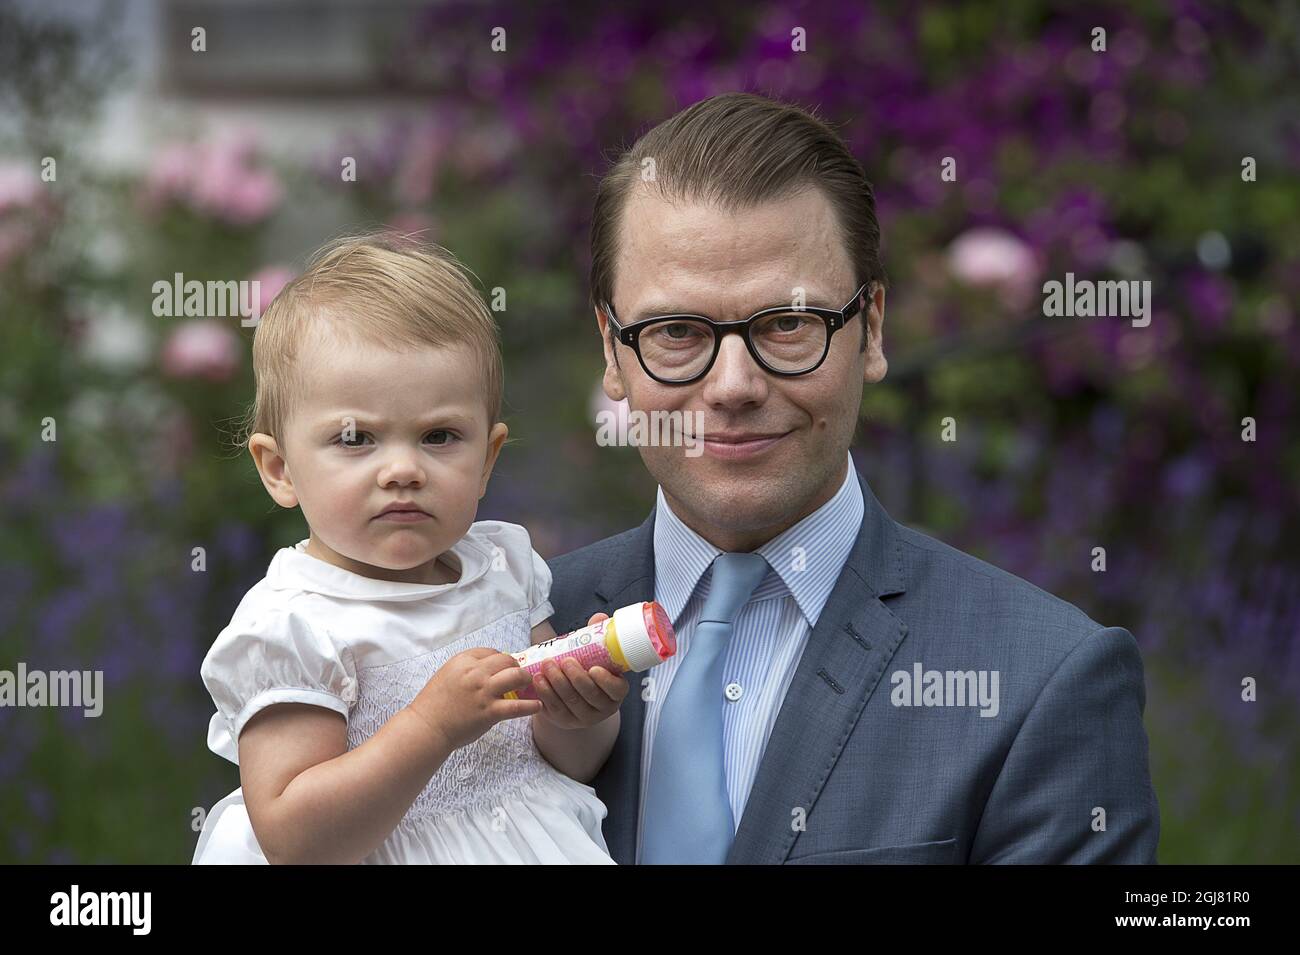 BORGHOLM 20130714 Swedish Prince Daniel and his daughter Princess Estelle, at the courtyard of the royal family's summer residence Solliden, on the island of Oeland, Sweden, on July 14, 2012, during the celebrations of Crown Princess Victorias 36th birthday. Photo: Jonas Ekstromer / SCANPIX / code 610030  Stock Photo